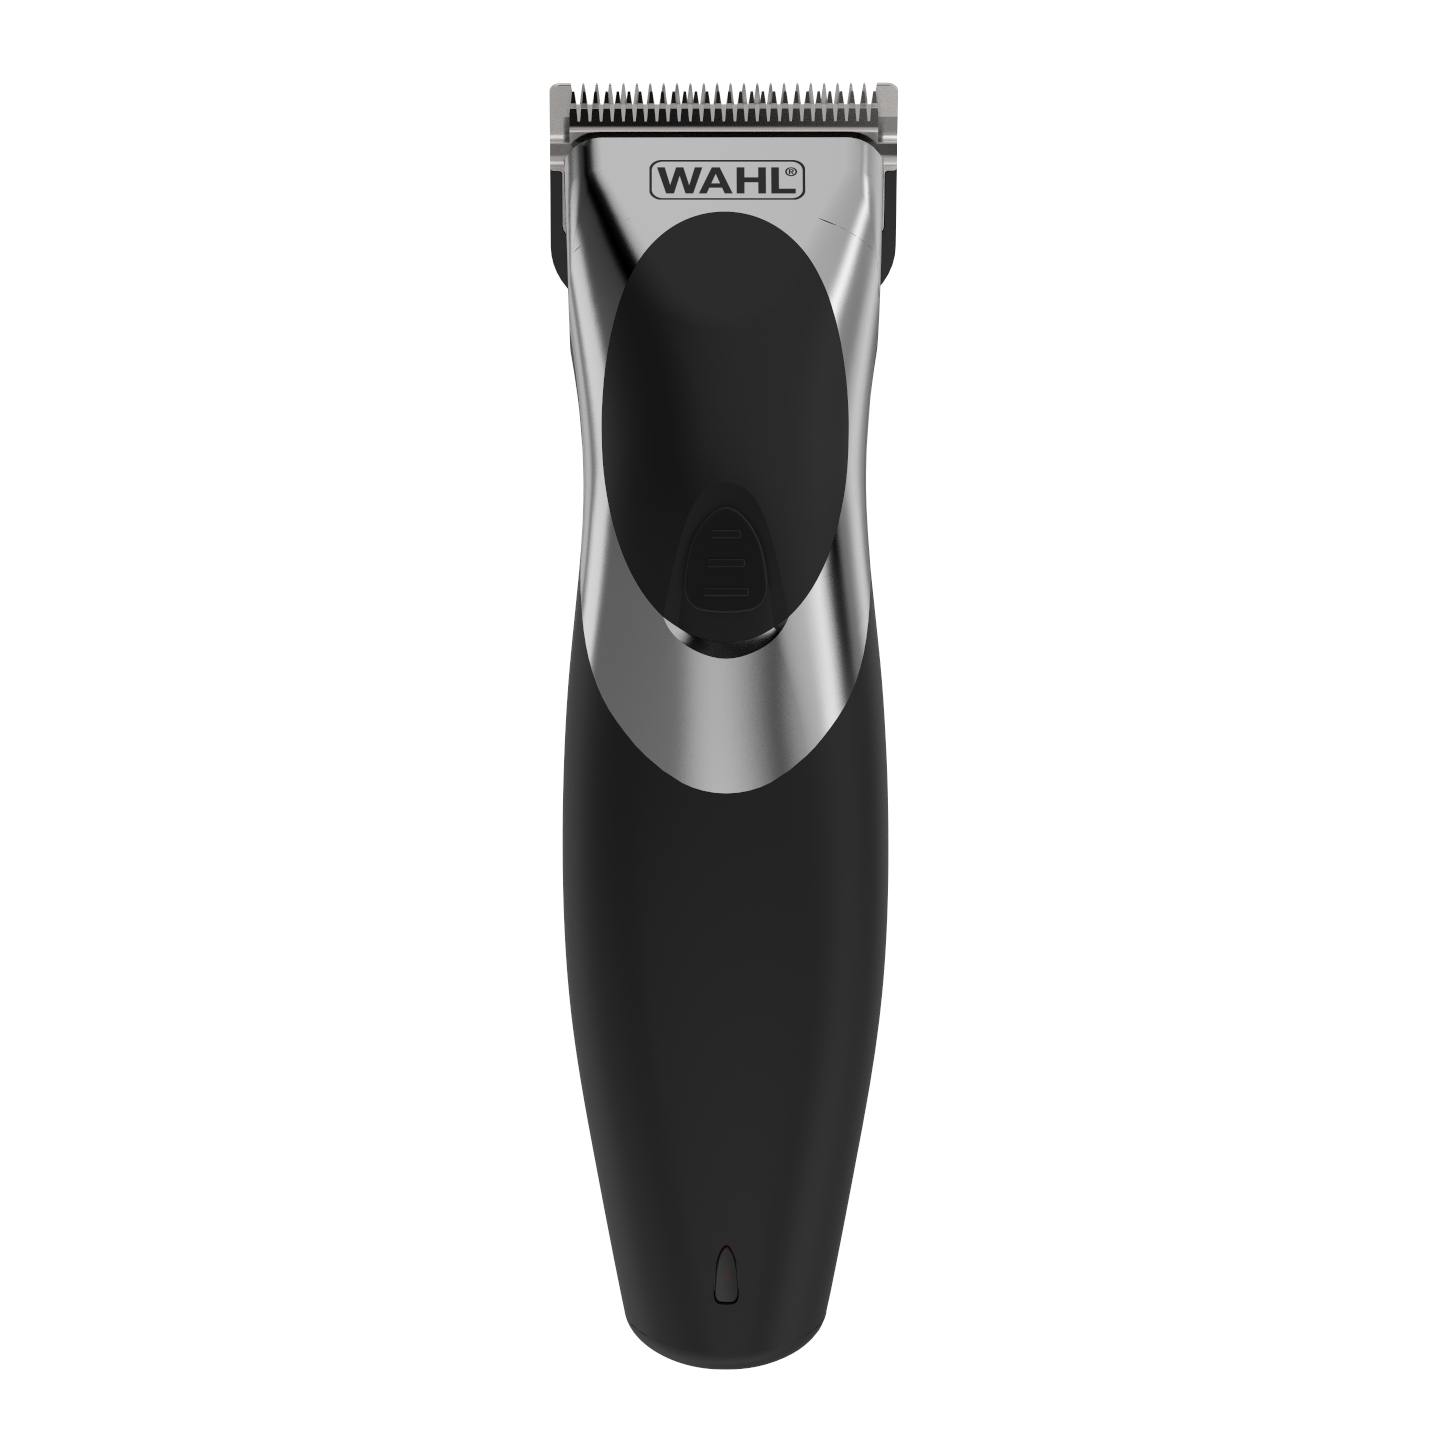 wahl cordless hair clippers for men